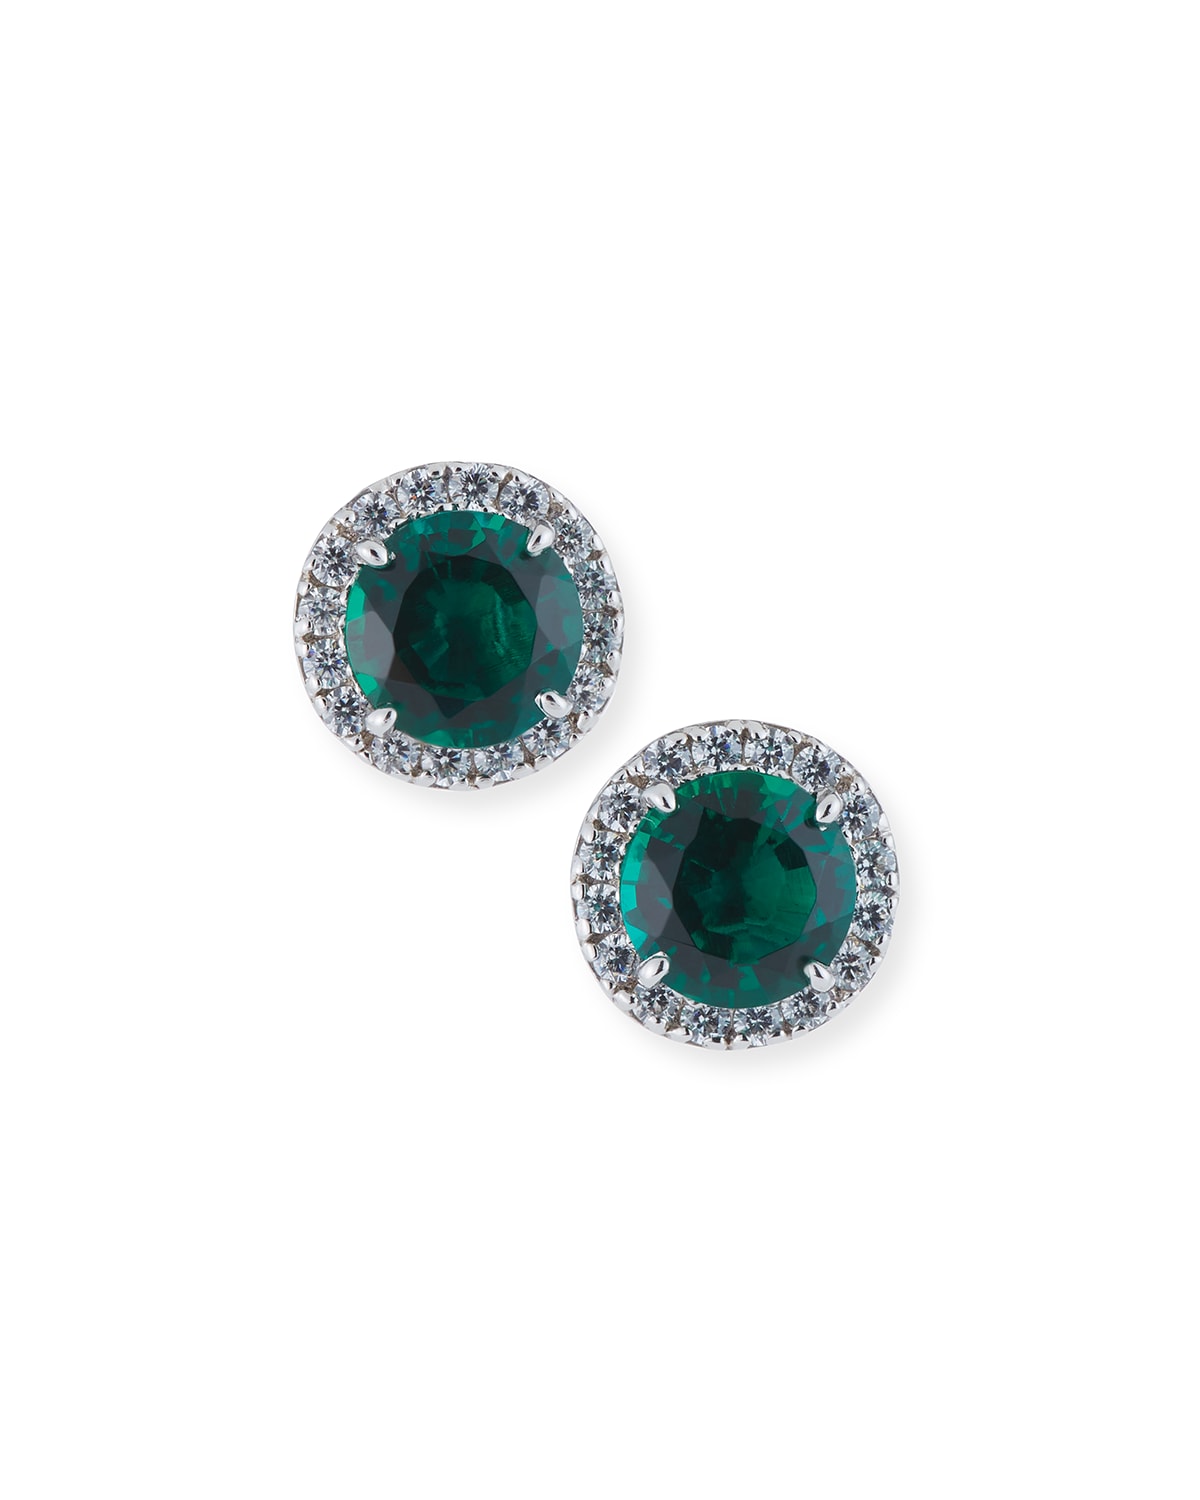 Fantasia By Deserio Round Cubic Zirconia Button Earrings